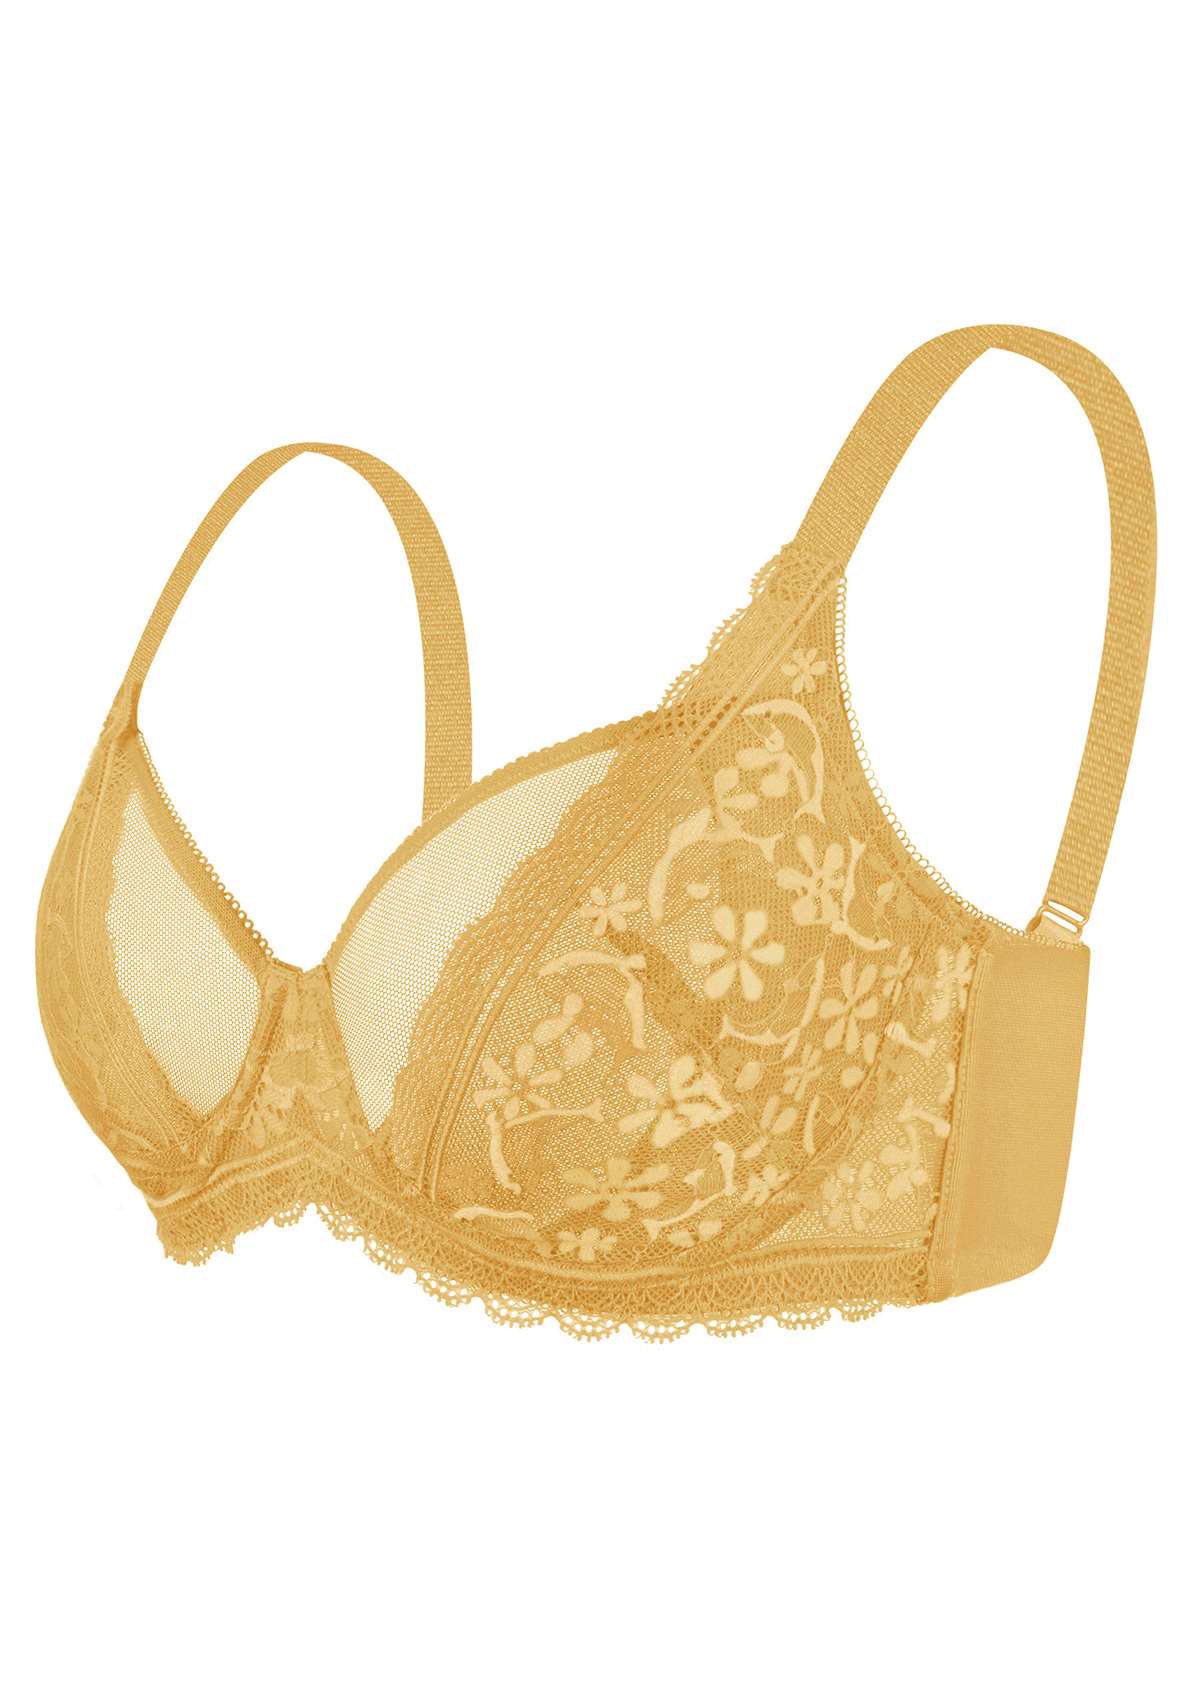 HSIA Anemone Lace Unlined Bra: Supportive, Lightweight Bra - Ginger / 38 / C